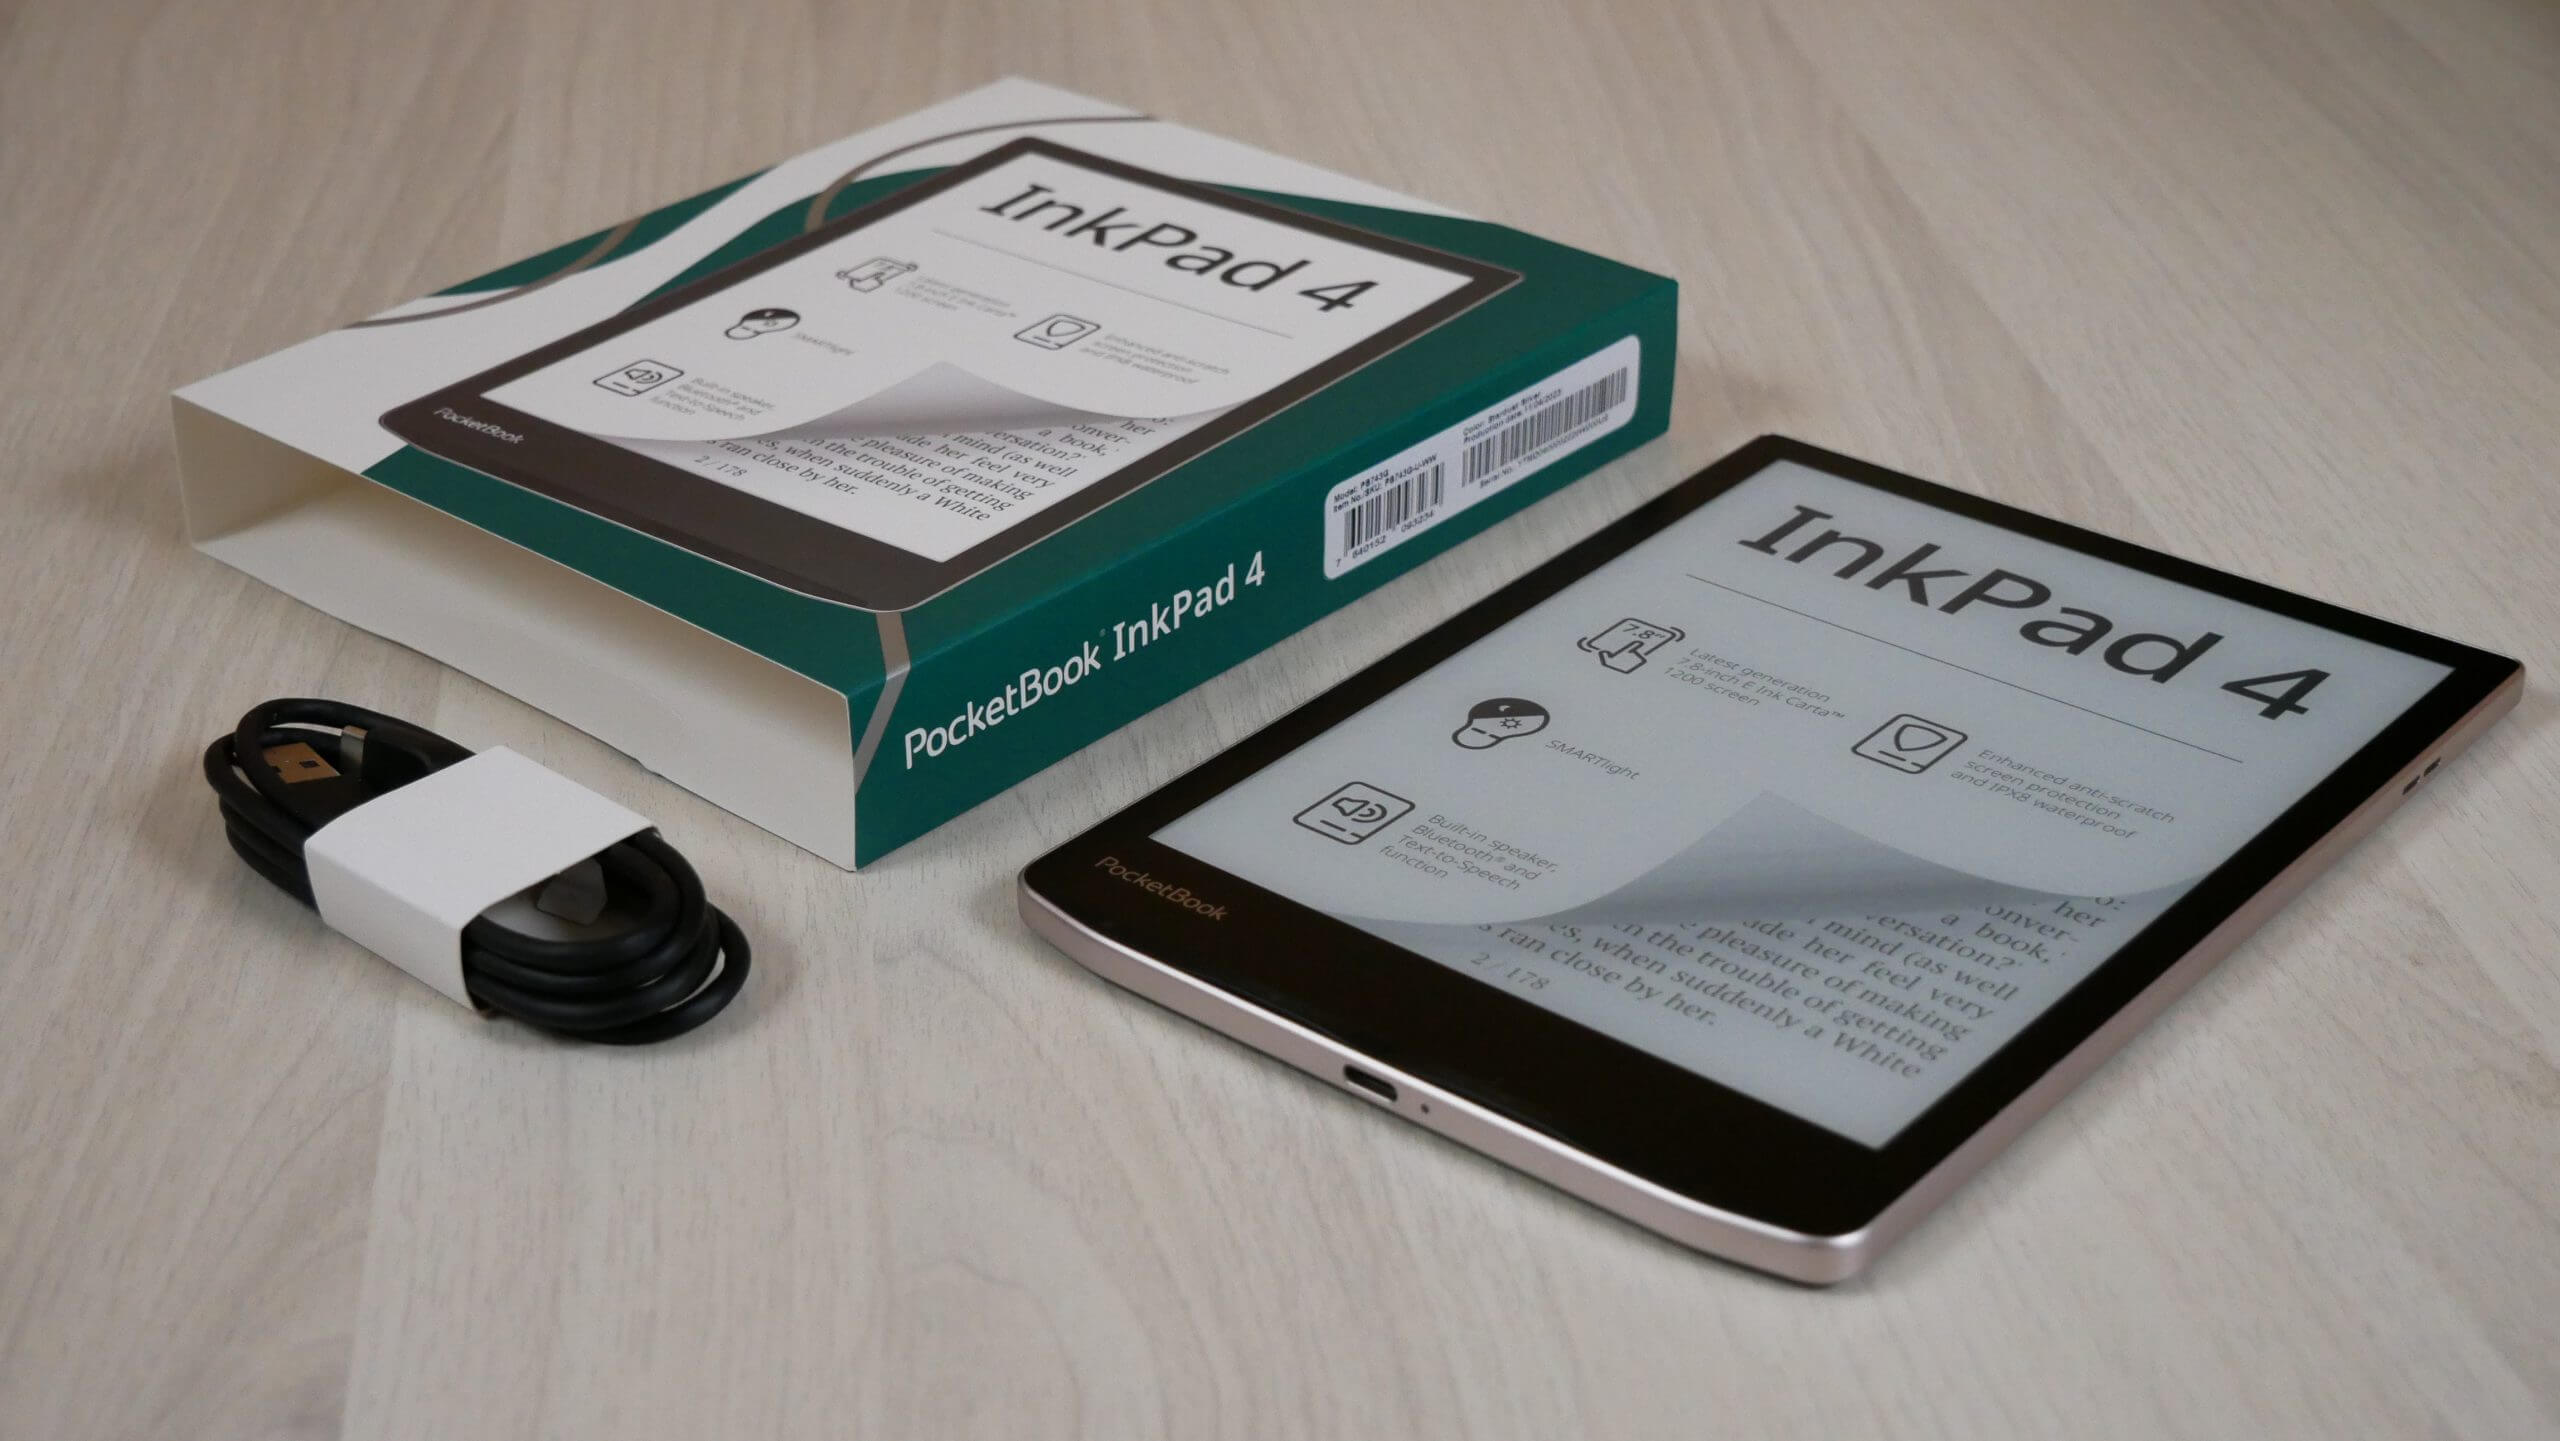 First Look at the Pocketbook InkPad 4 e-Reader – LiveWriters